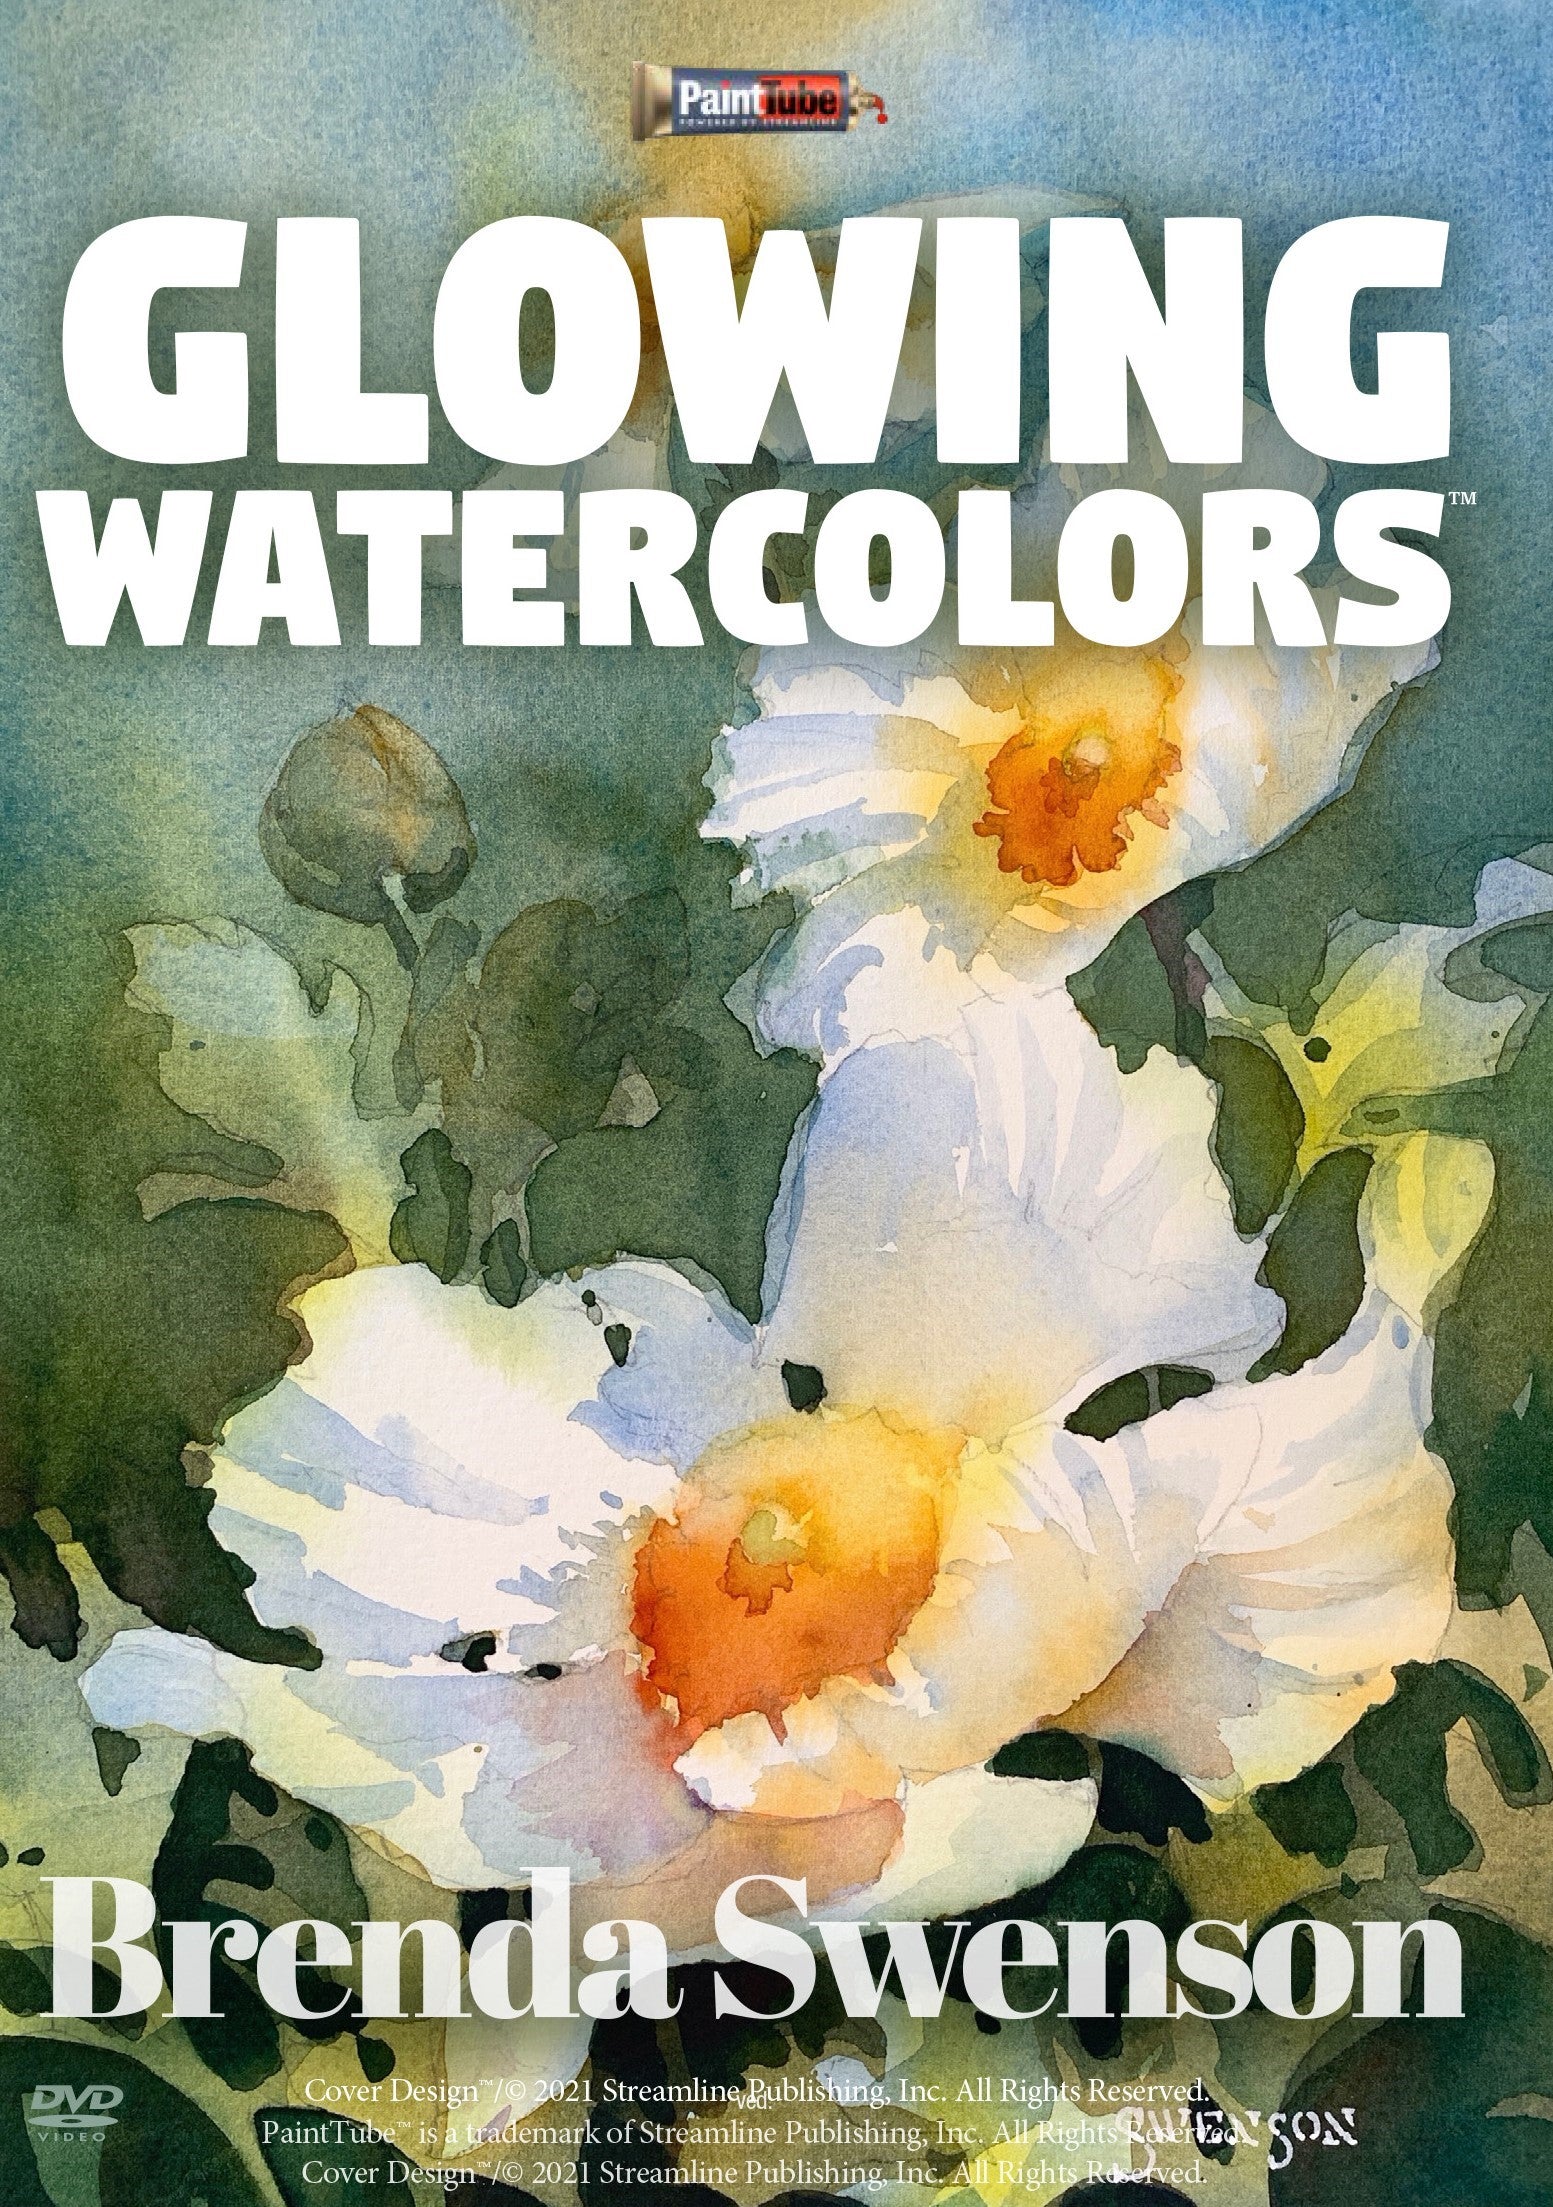 Recommended Watercolor Books